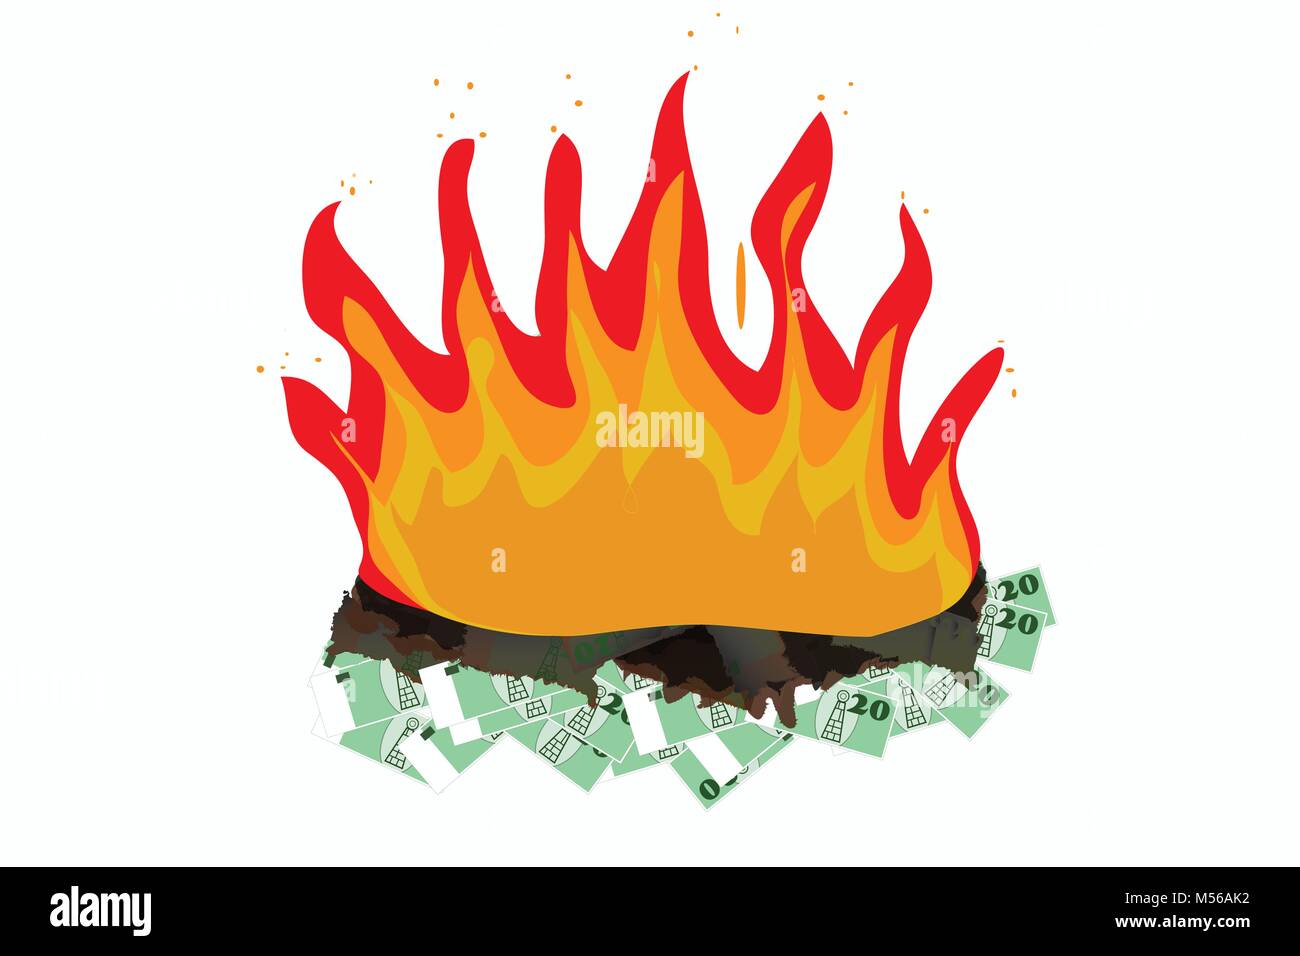 Illustration of a bunch of money burning, vector of inflamed heap of money, symbol for financial crisis/ wrong fatal decisions/ Stock Market crash Stock Vector